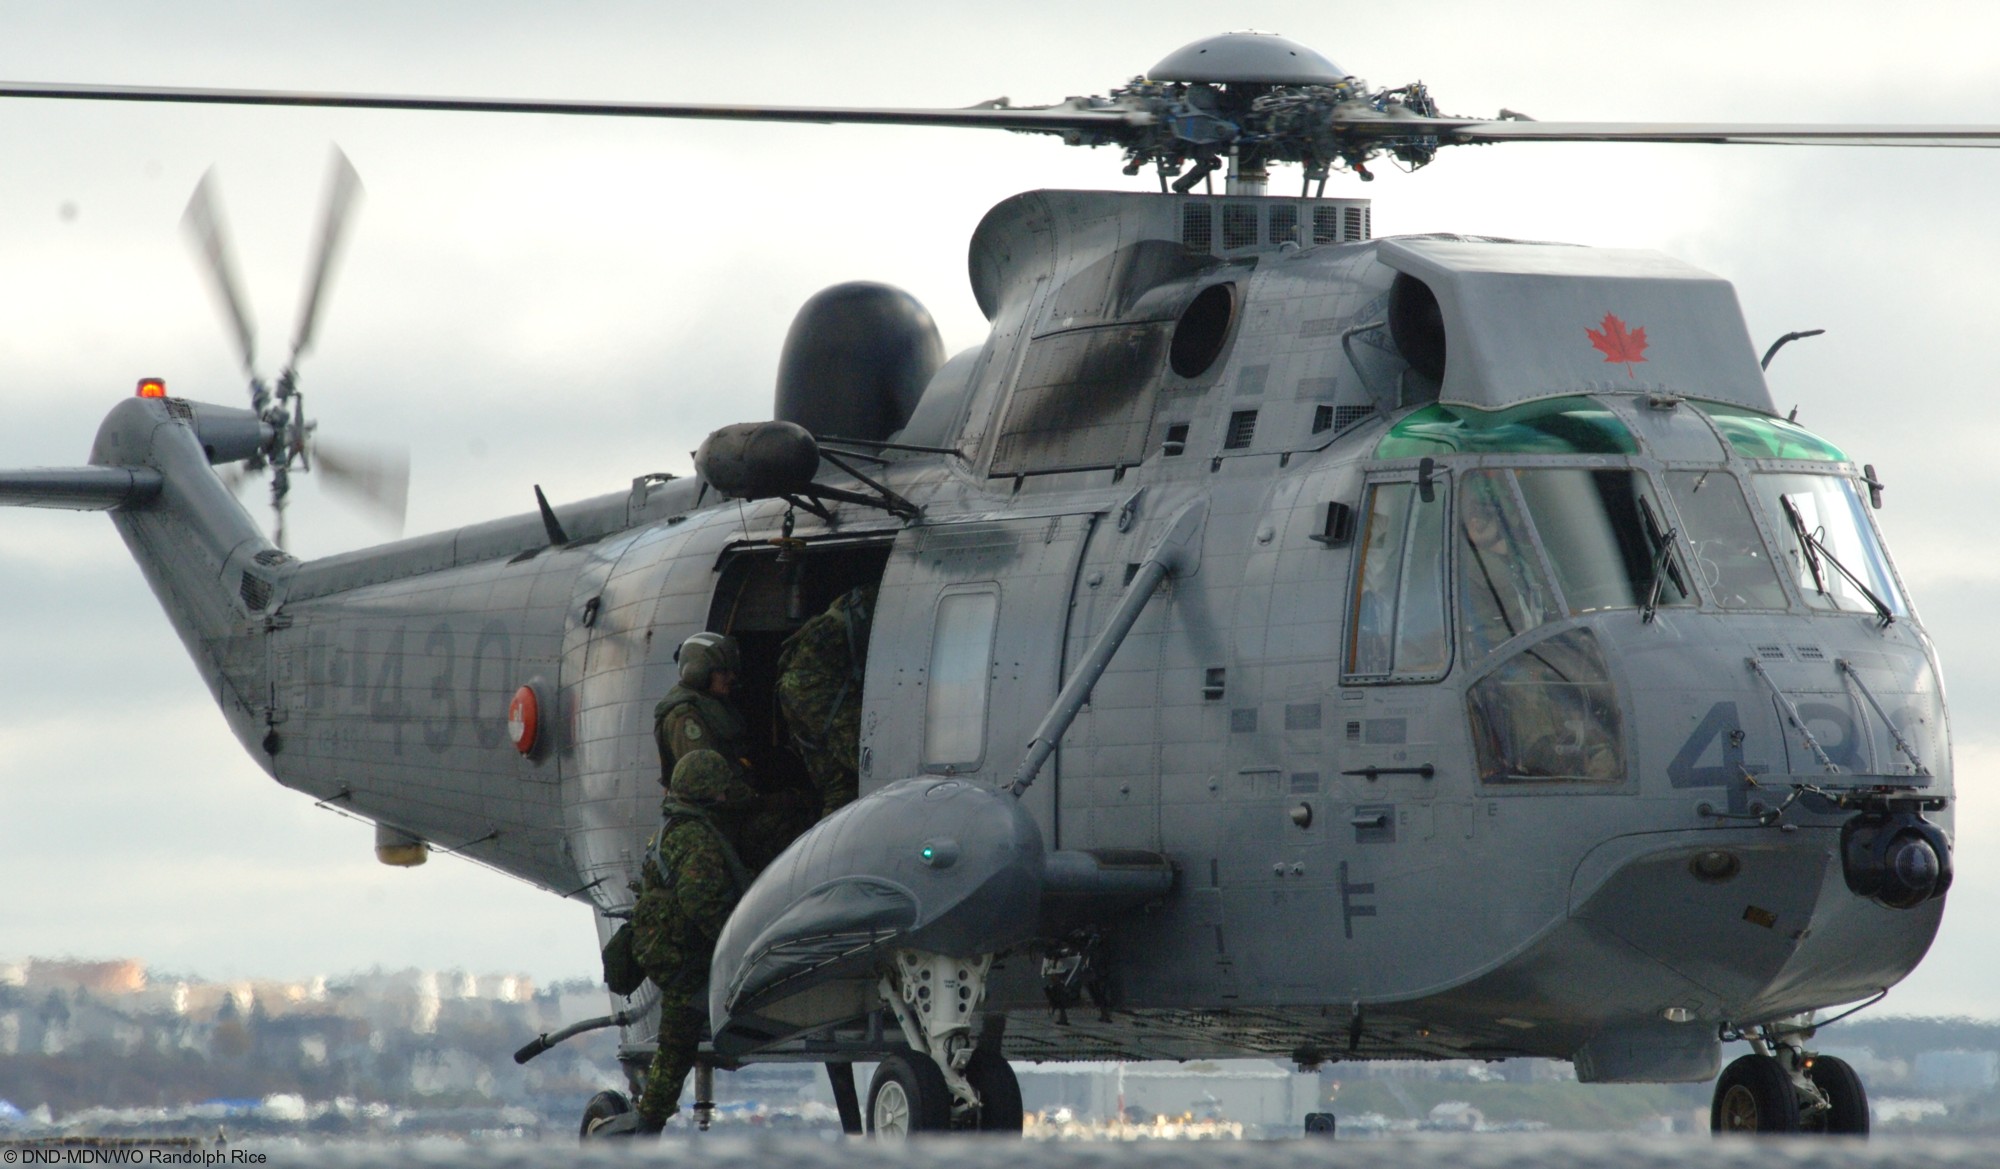 ch-124 sea king royal canadian navy sikorsky naval helicopter rcaf hmcs squadron 25